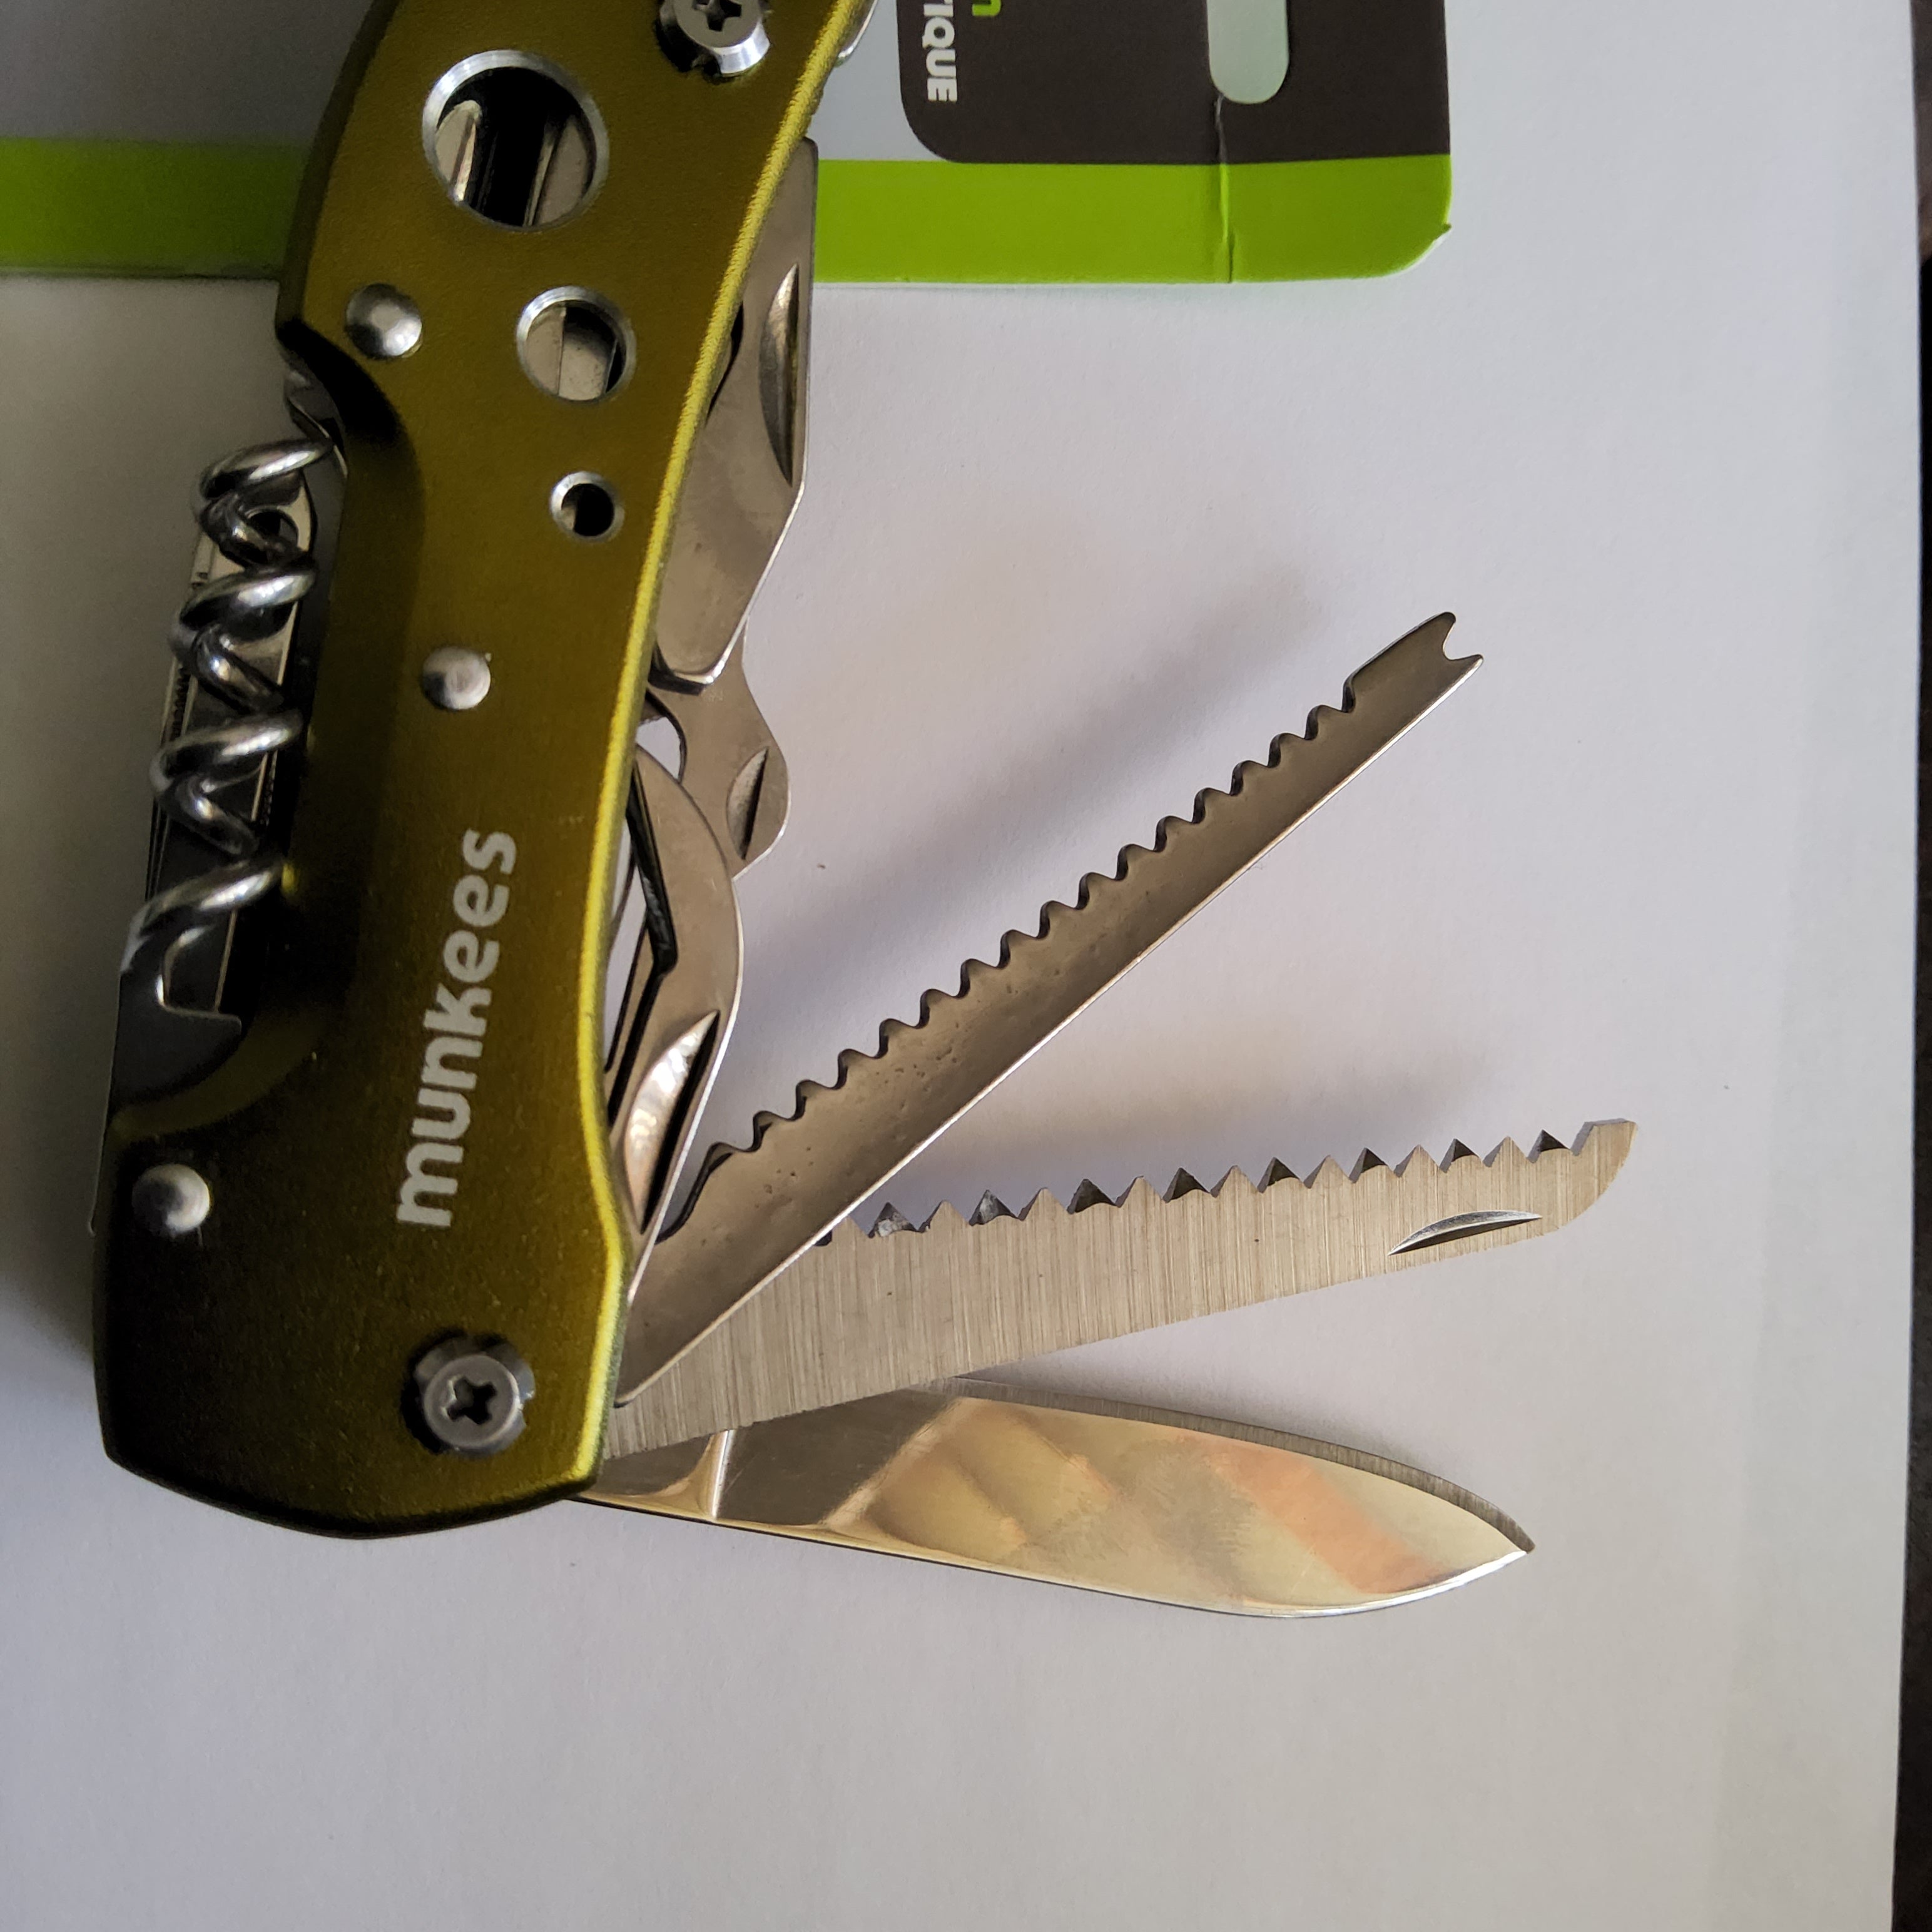 Munkees Multi Tool with LED Green #2581